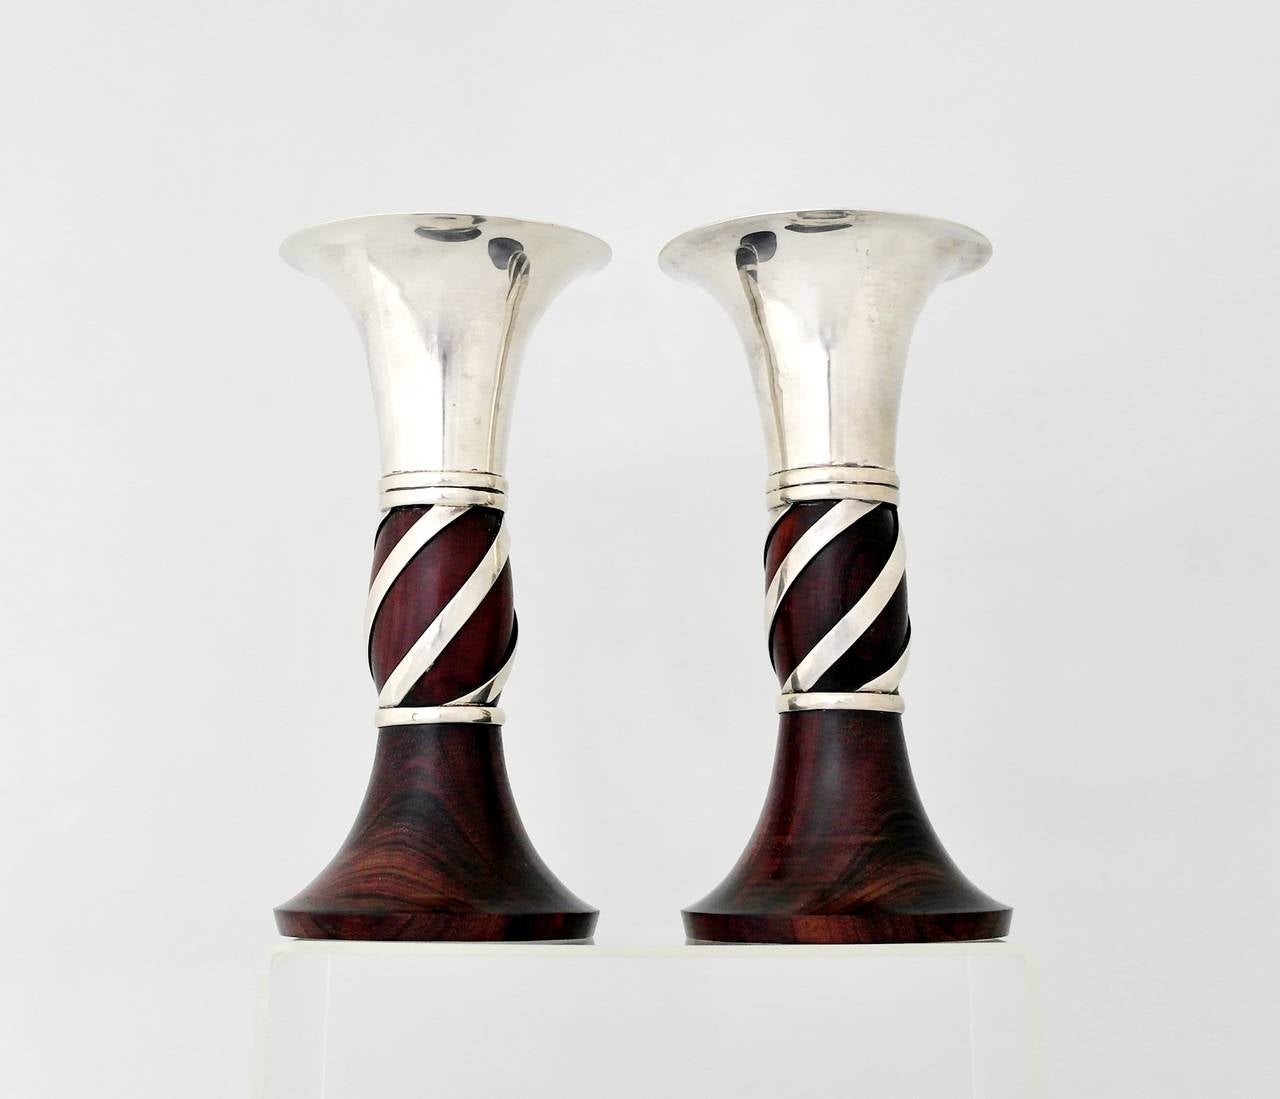 Mexican William Spratling Sterling Silver and Rosewood Candlesticks, pair 1950 For Sale